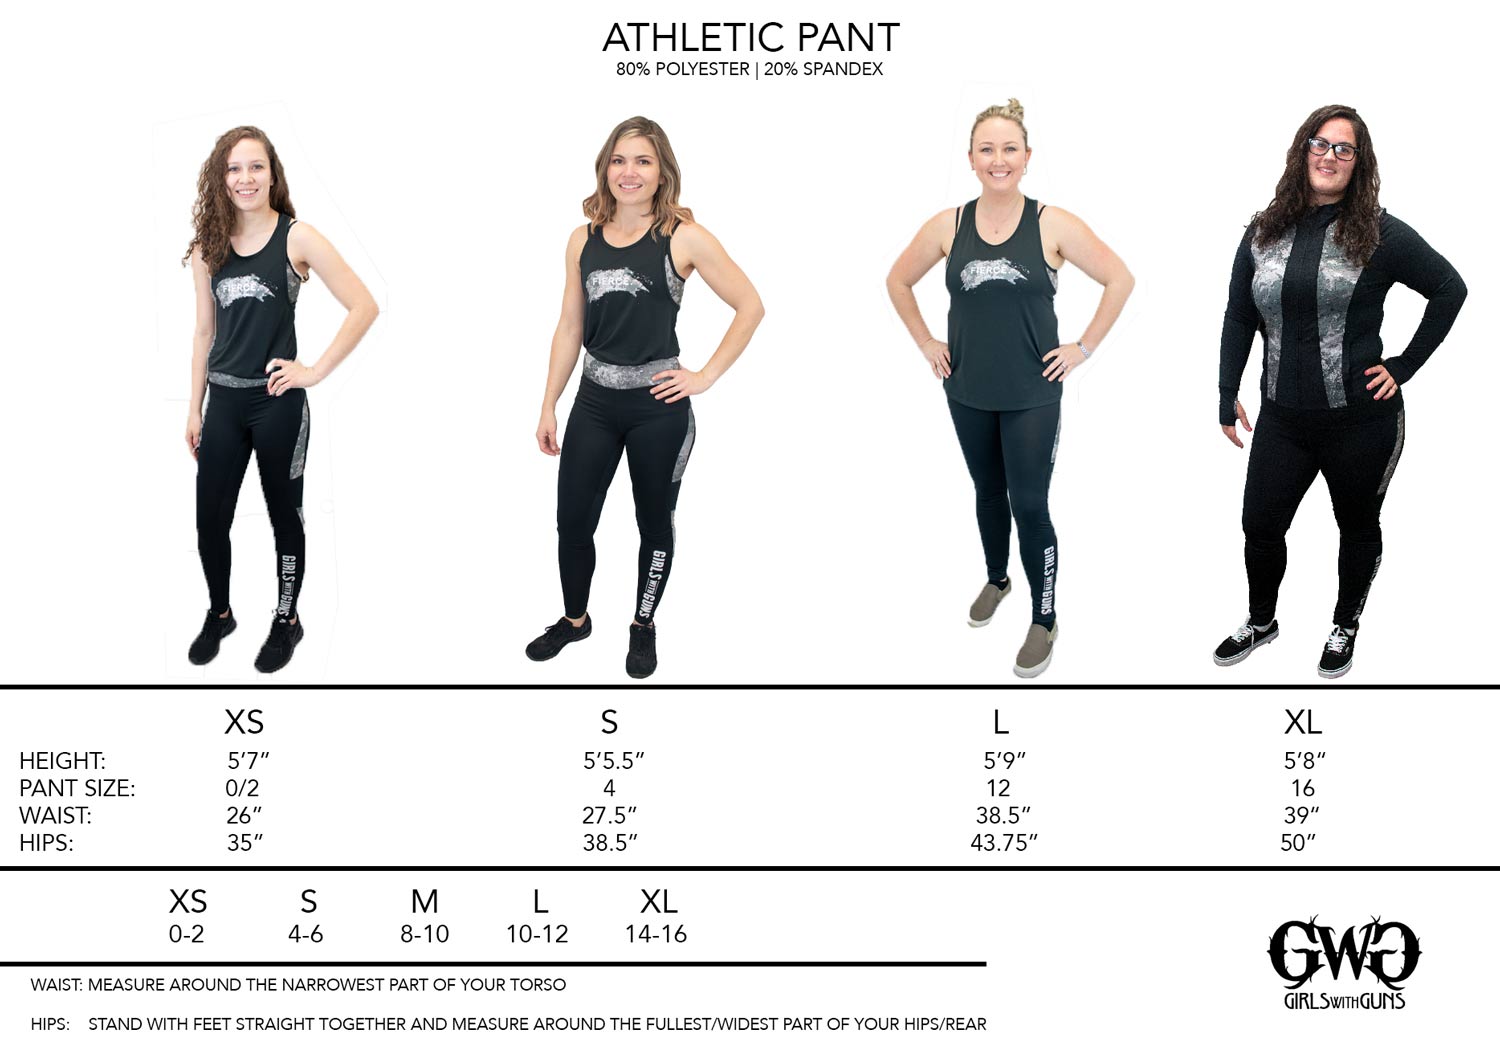 Size Chart  Athletic Pants - Girls With Guns